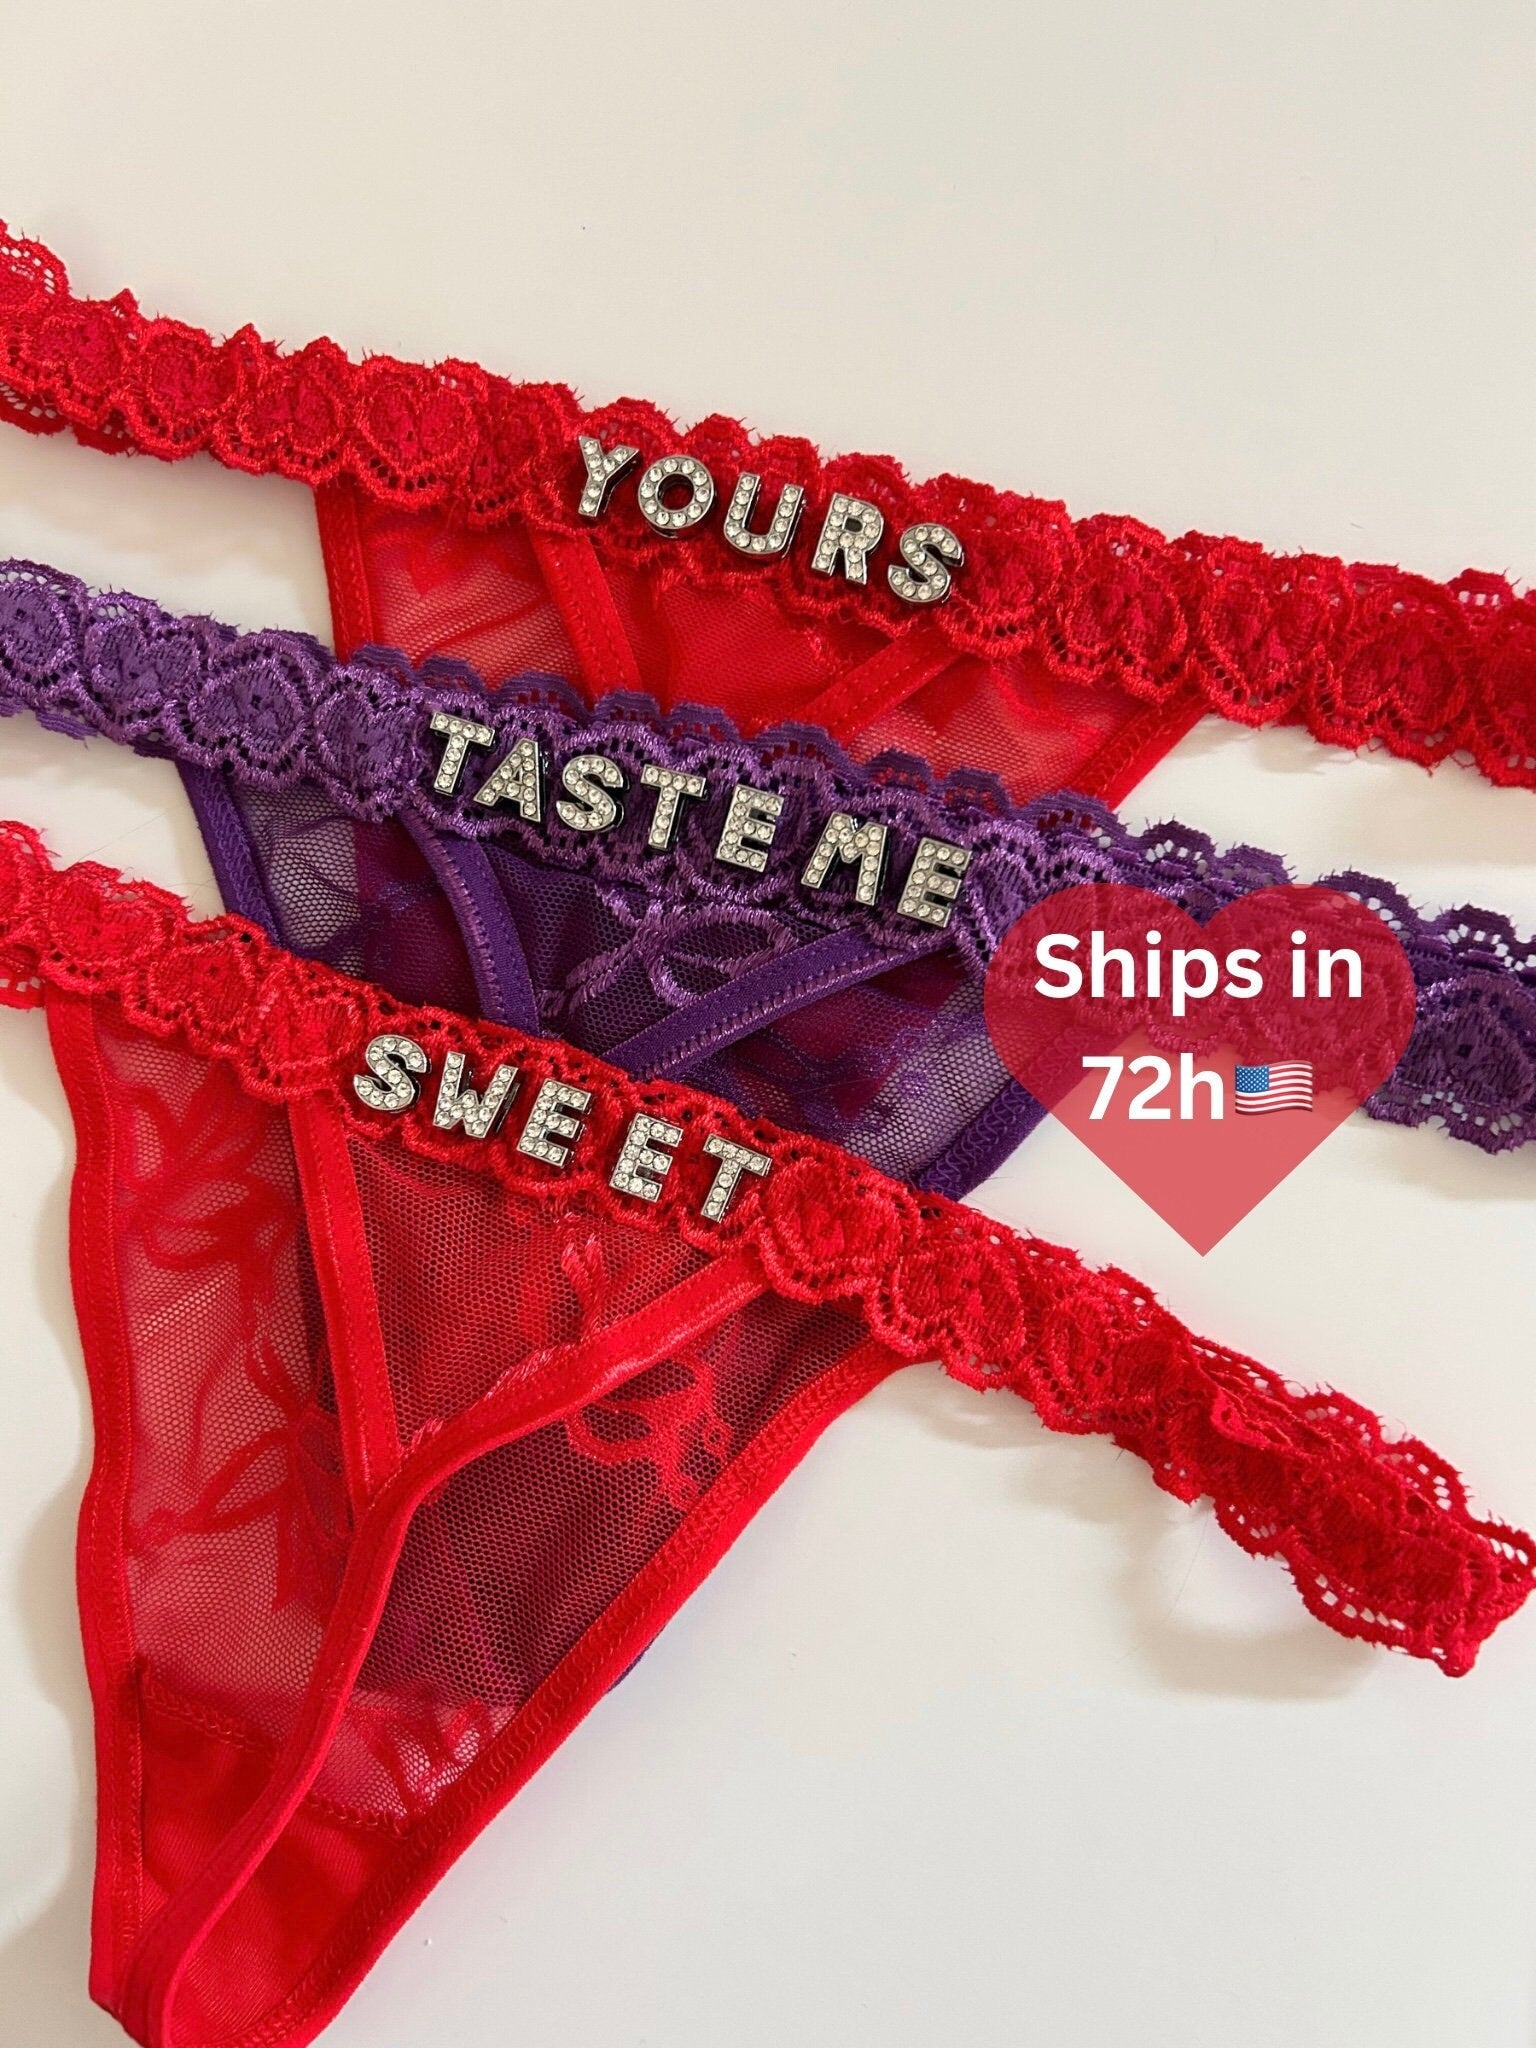 Personalized Name Thong: A Unique Surprise for Your Partner